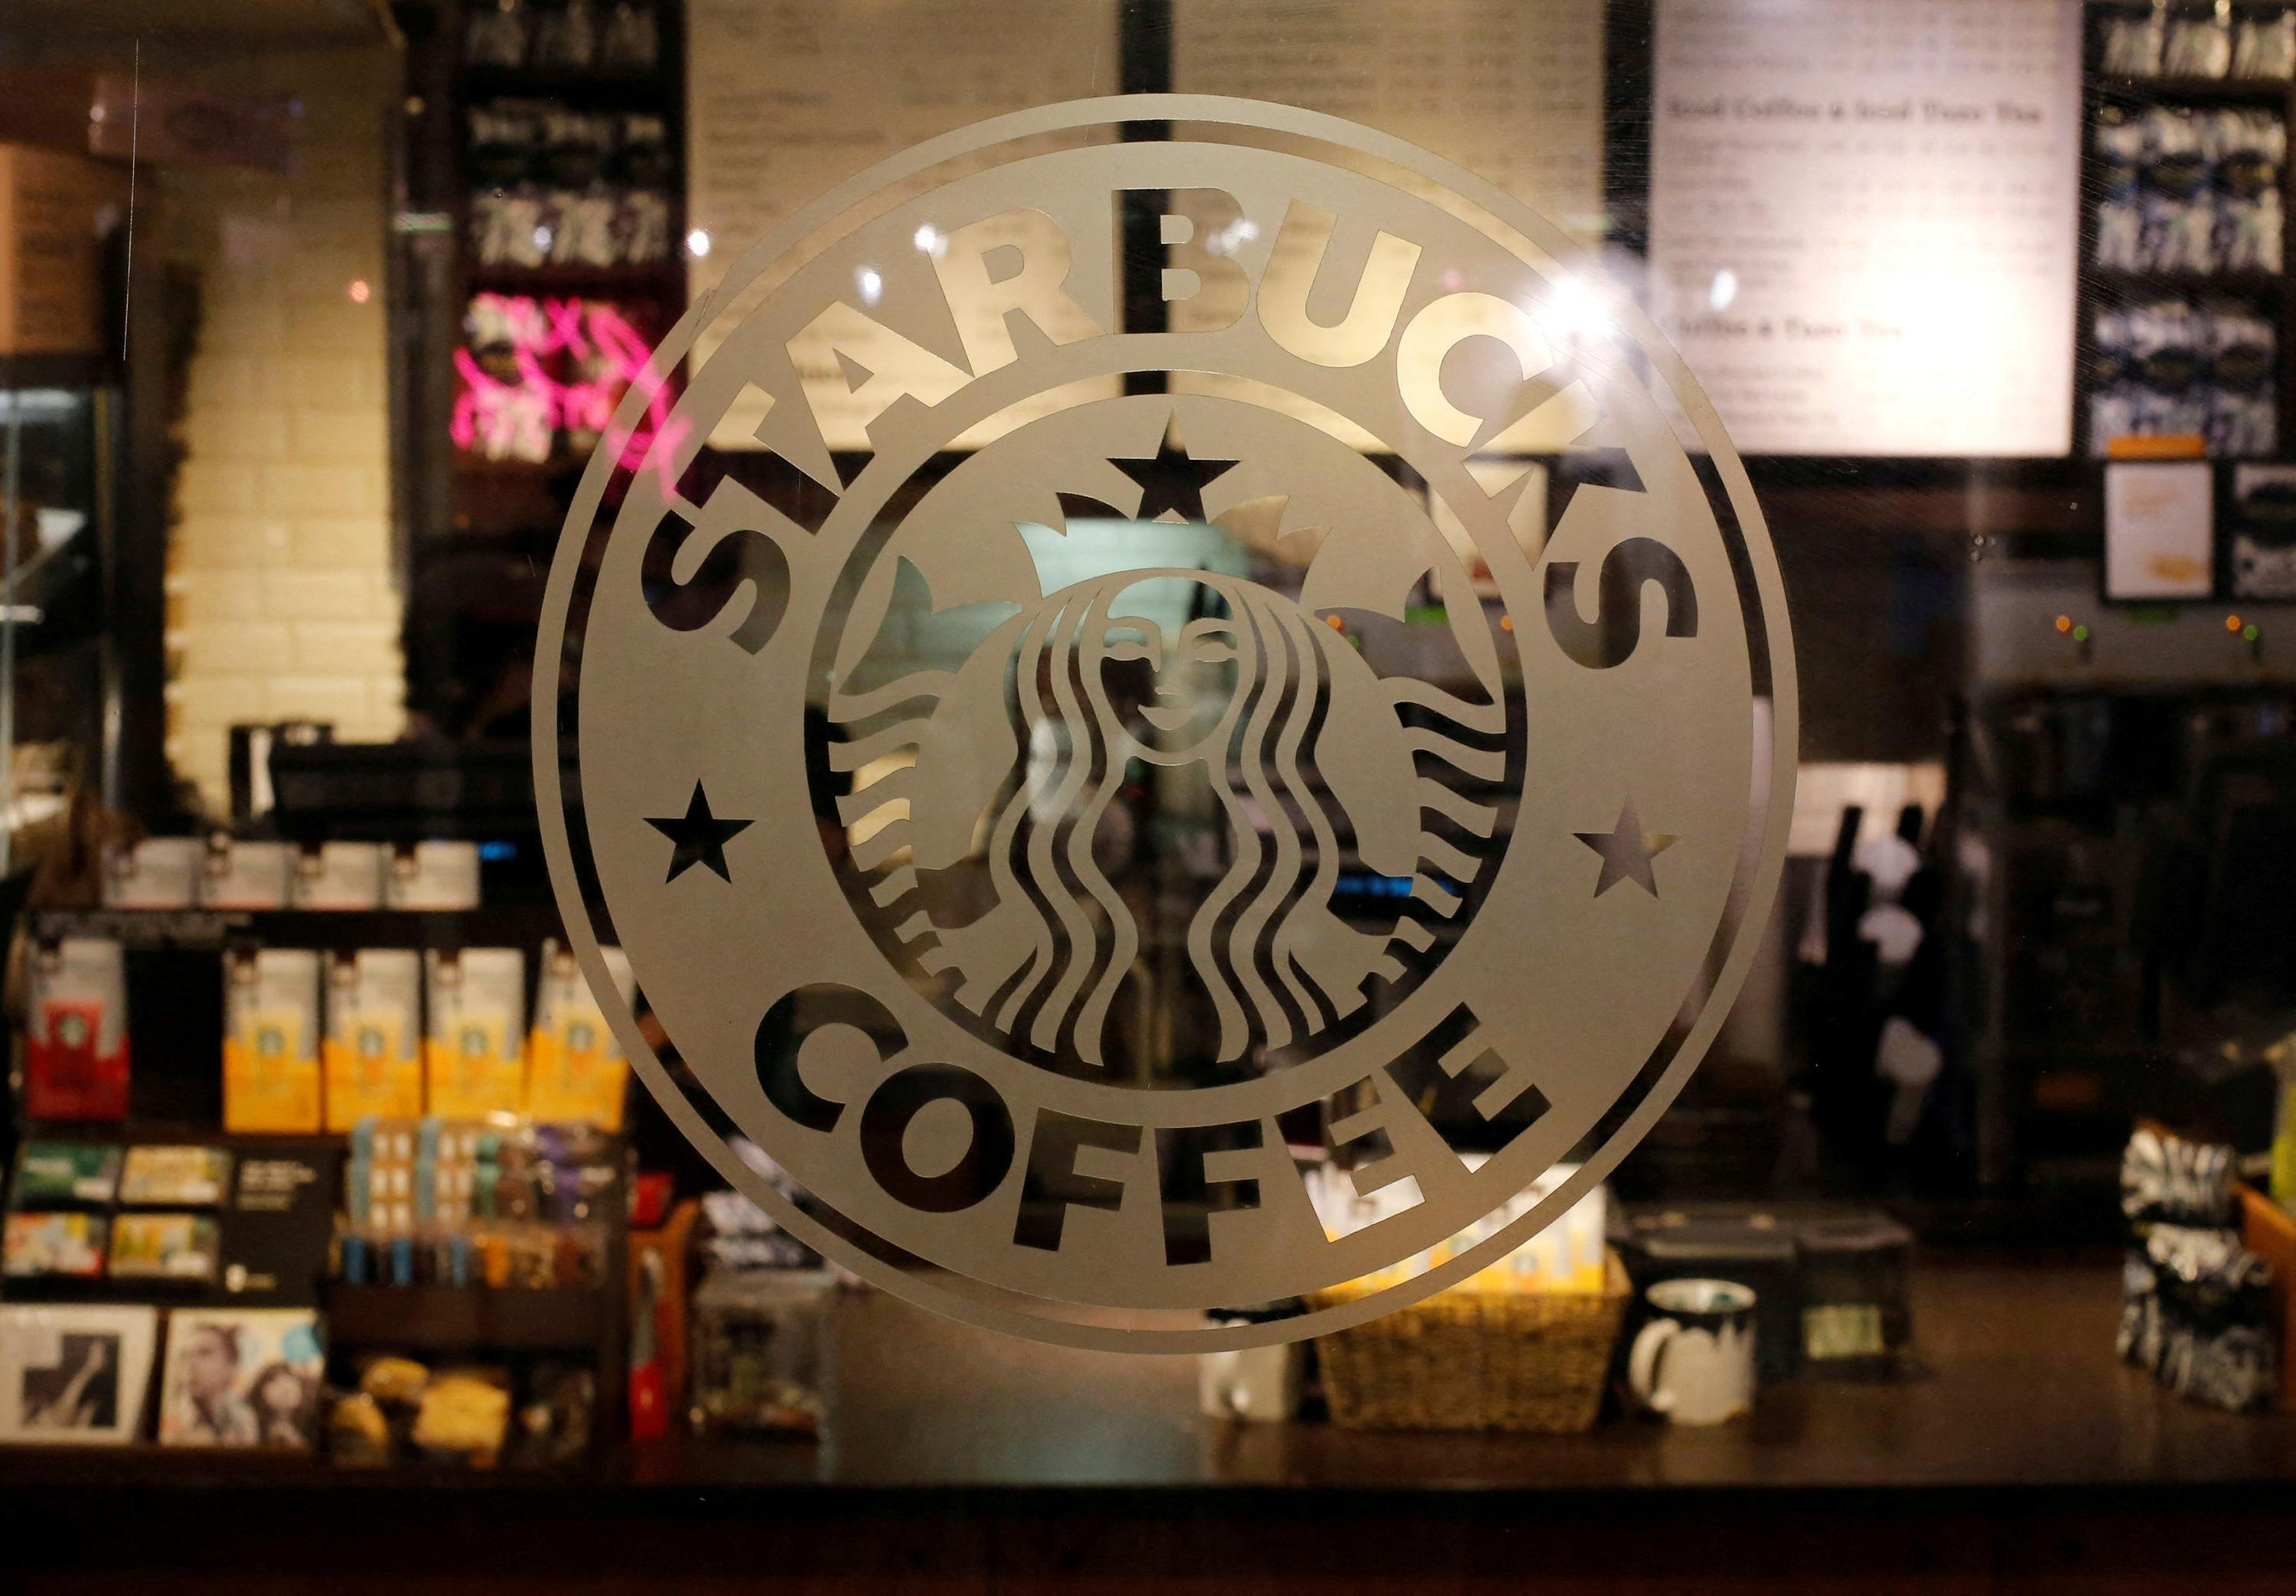 Starbucks accused of tricking customers into its app and raking in $900 million